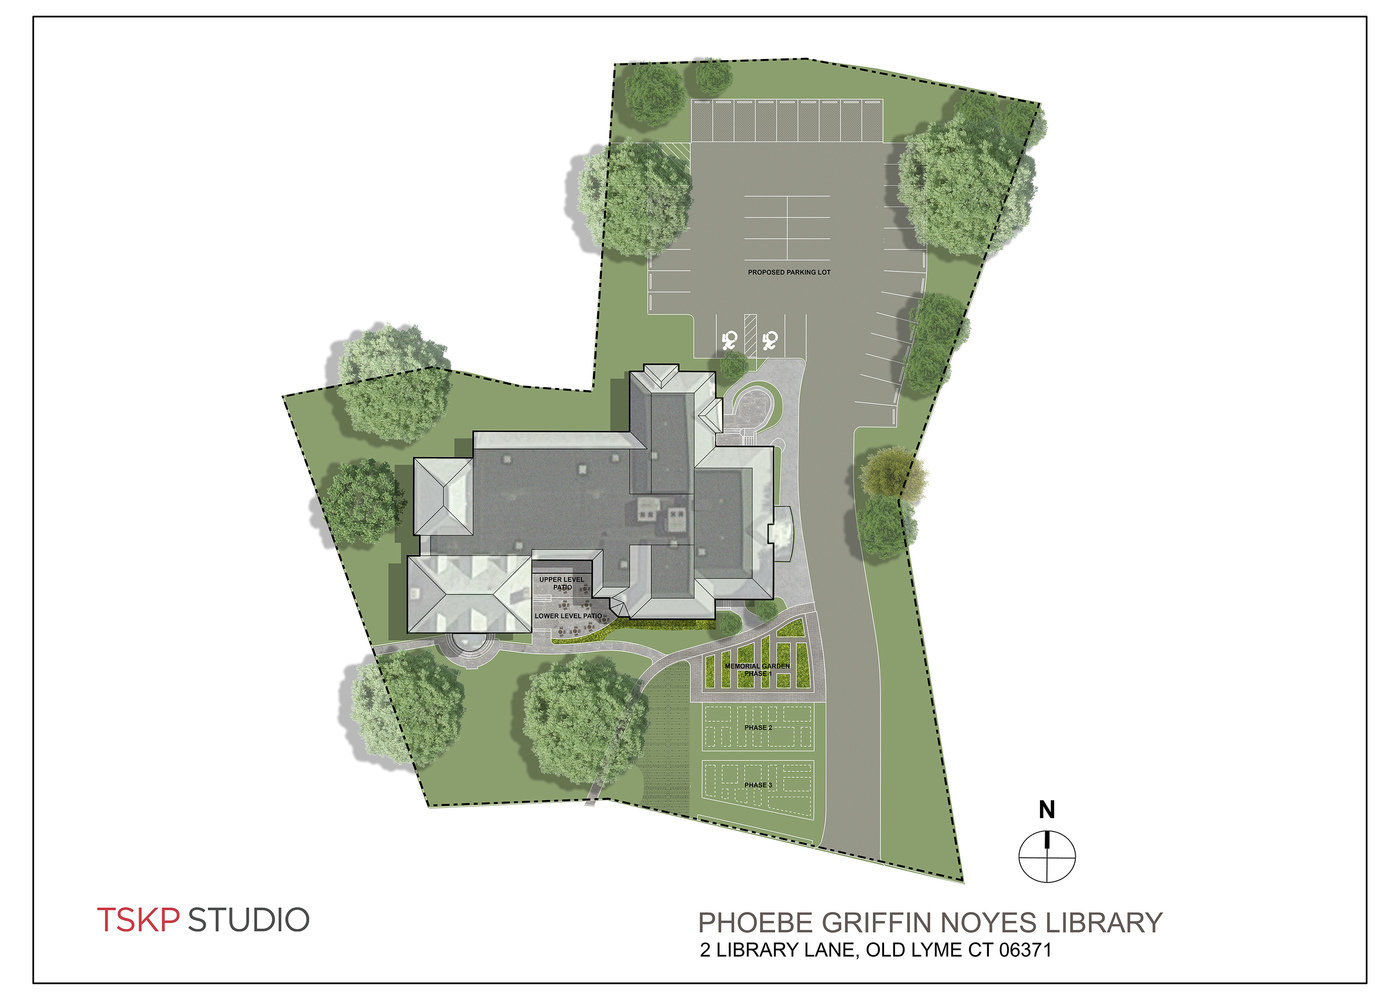 3 tskp old lyme phoebe griffin noyes library rendering site plan 1400 xxx q85